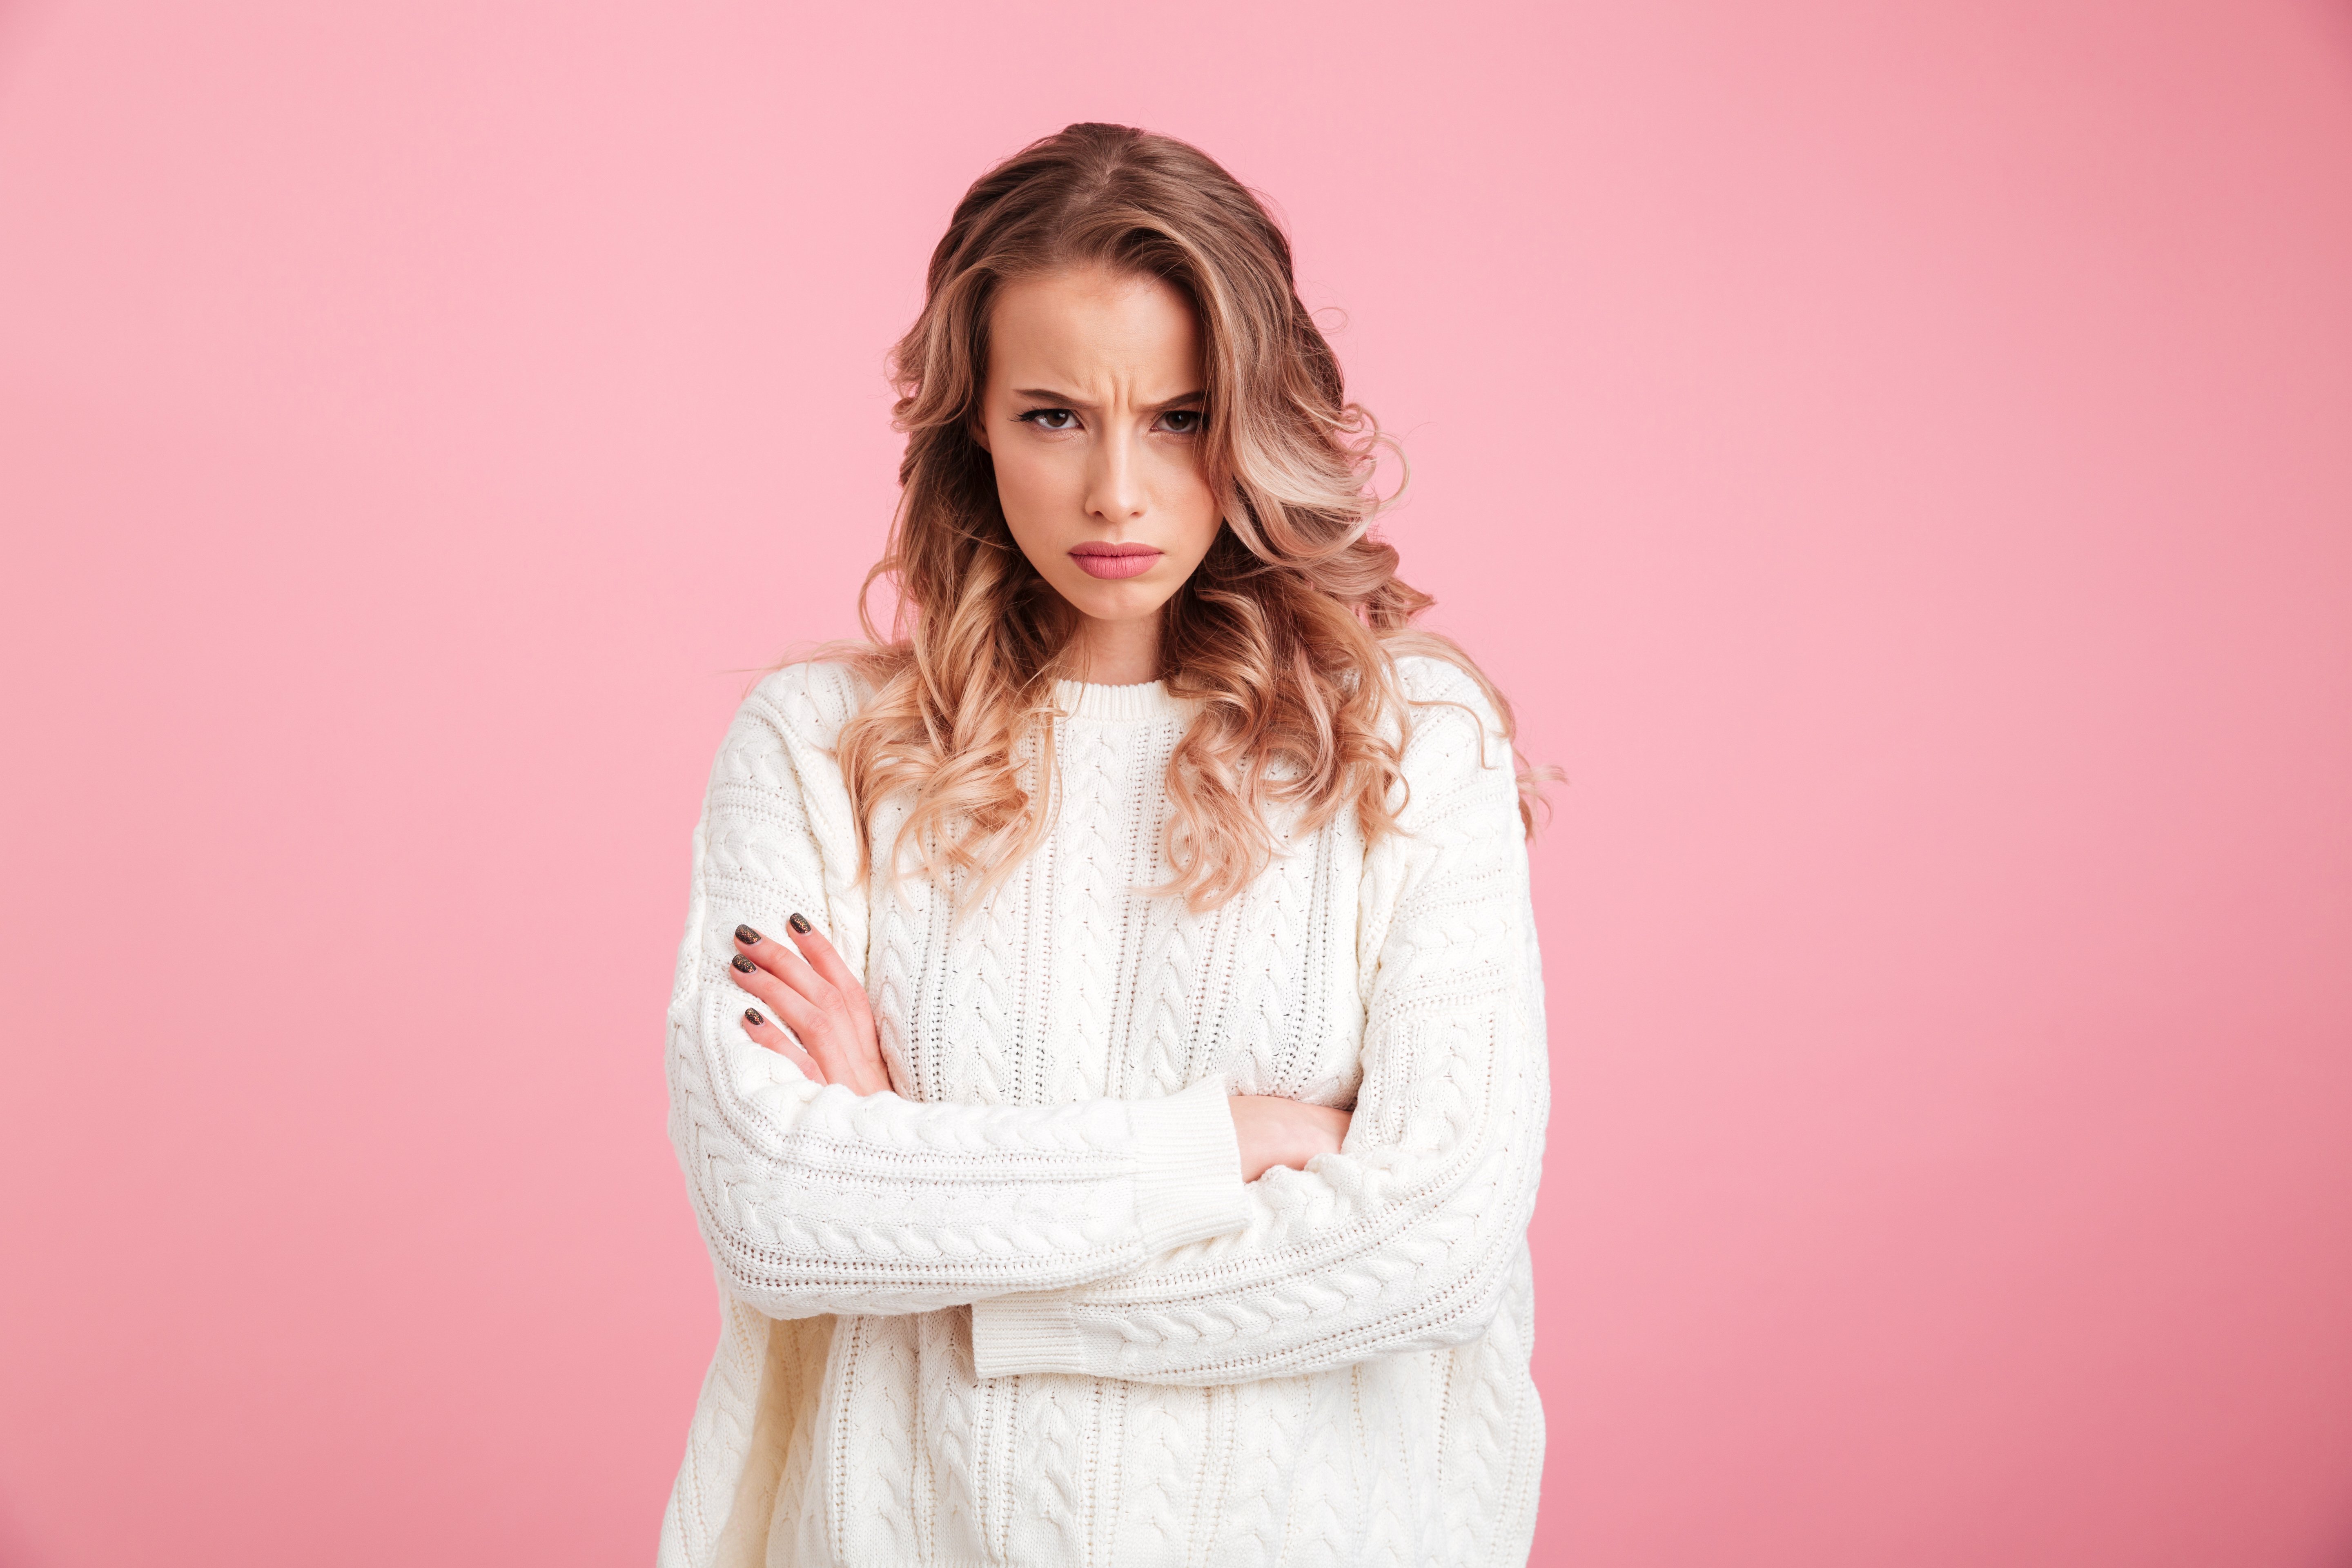 Angry young woman with arms folded. | Source: Shutterstock